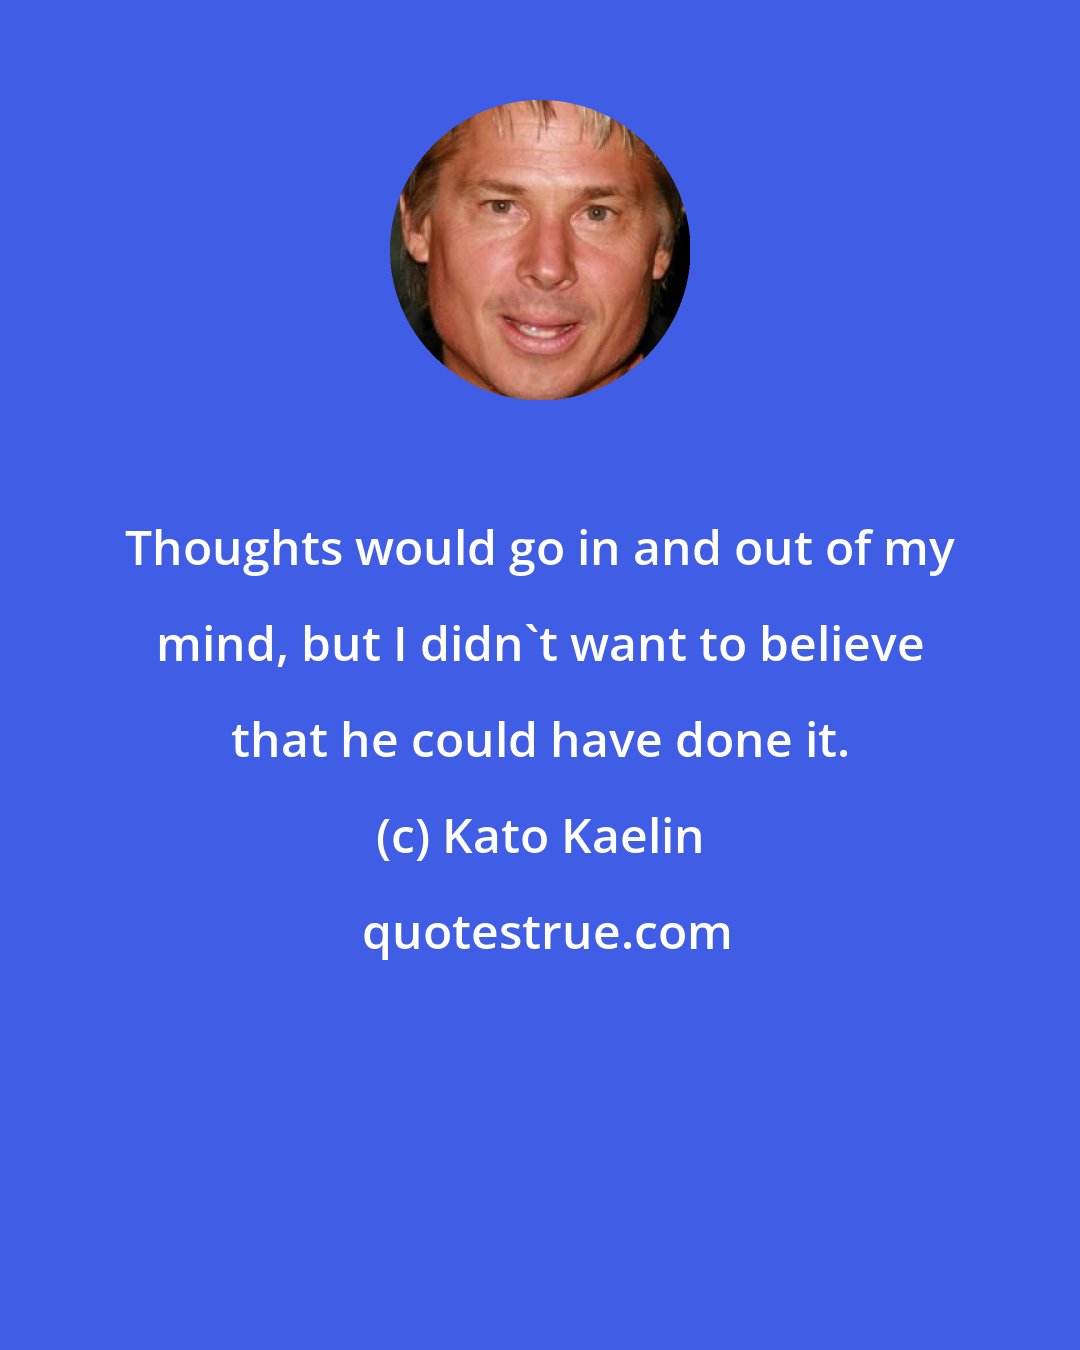 Kato Kaelin: Thoughts would go in and out of my mind, but I didn't want to believe that he could have done it.